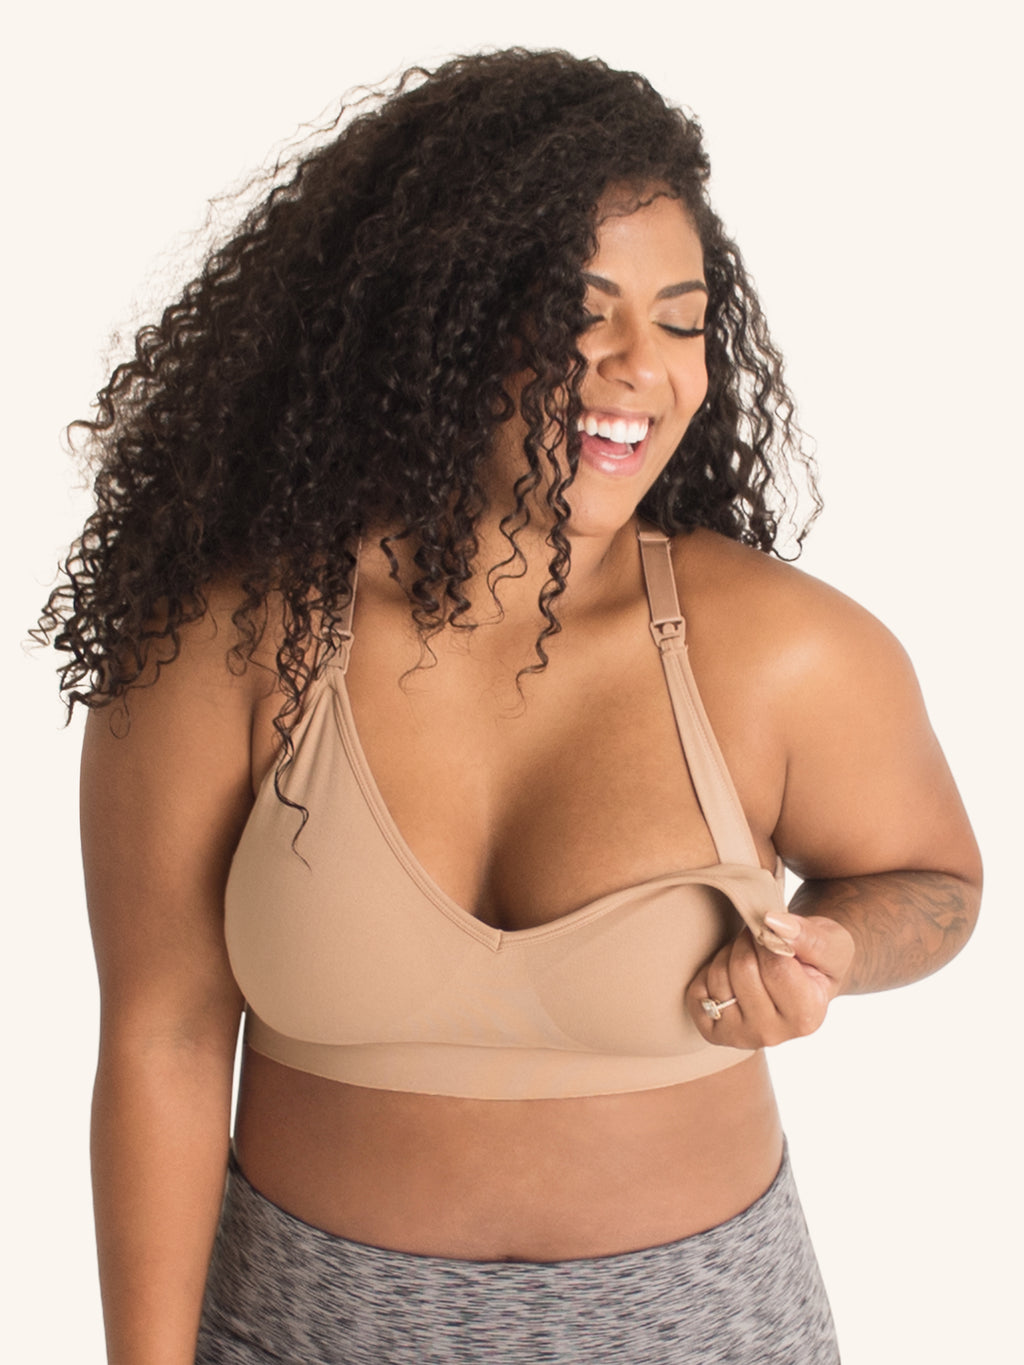 Shaping Foam Wirefree Nursing Bra with Lace